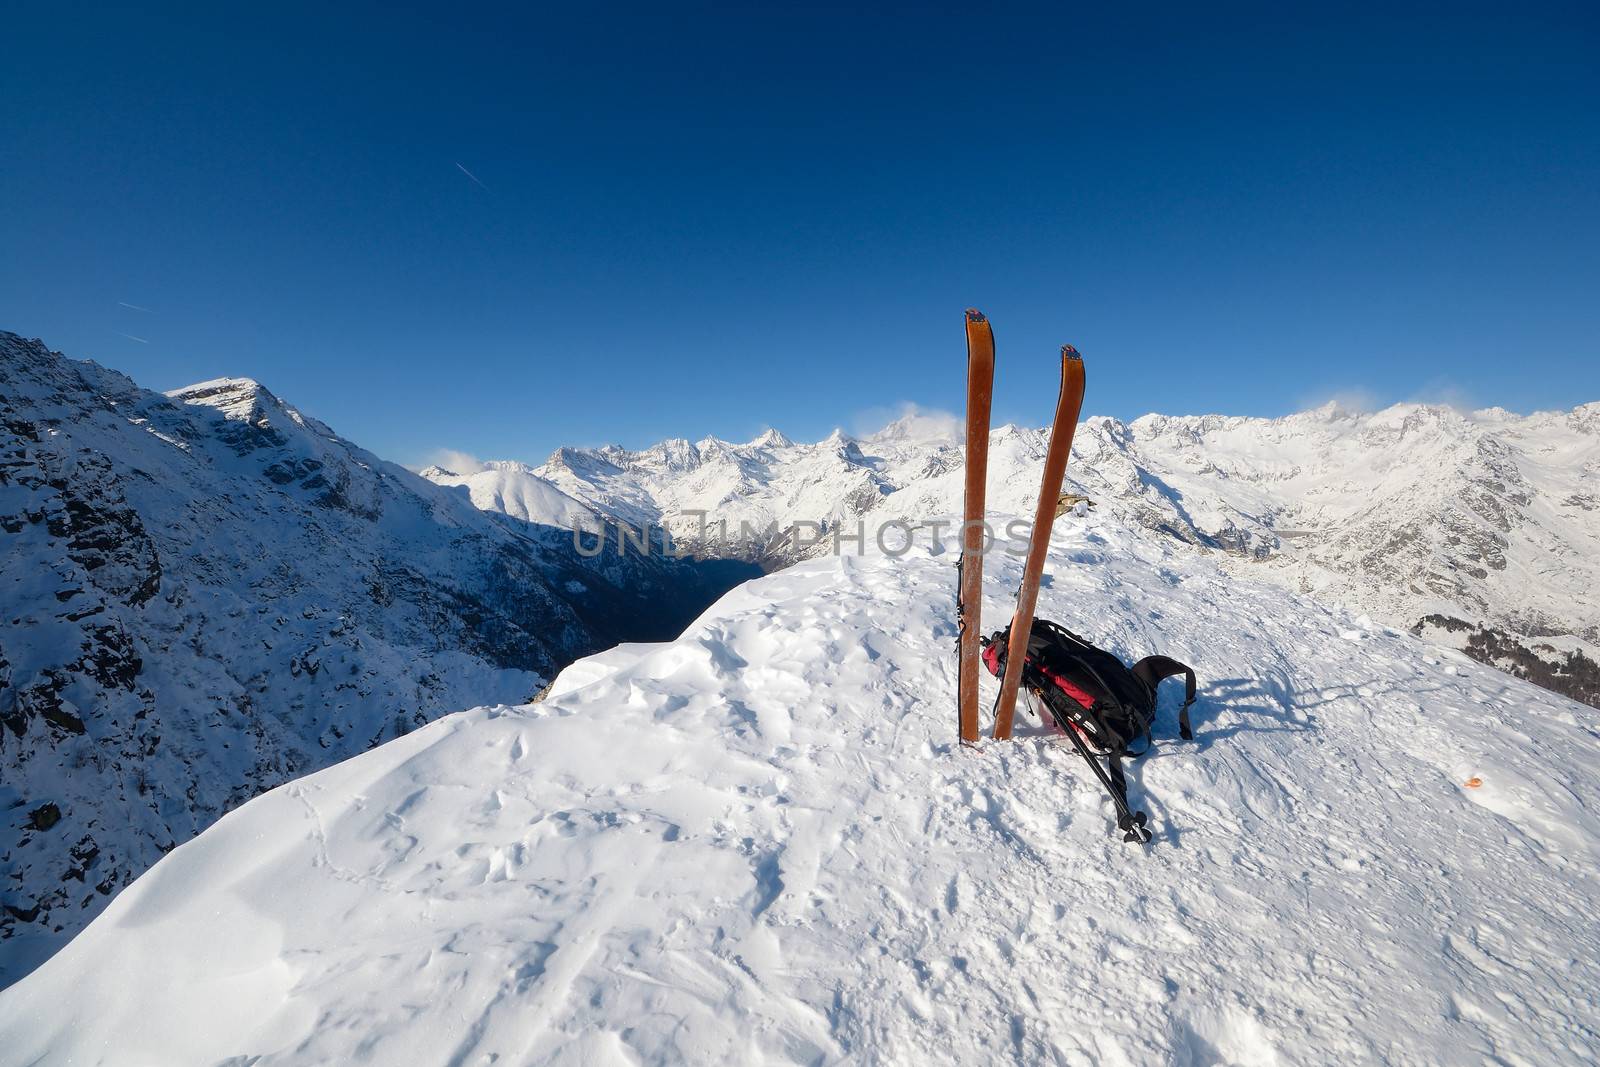 Ski tour equipment and avalanche safety tools by fbxx